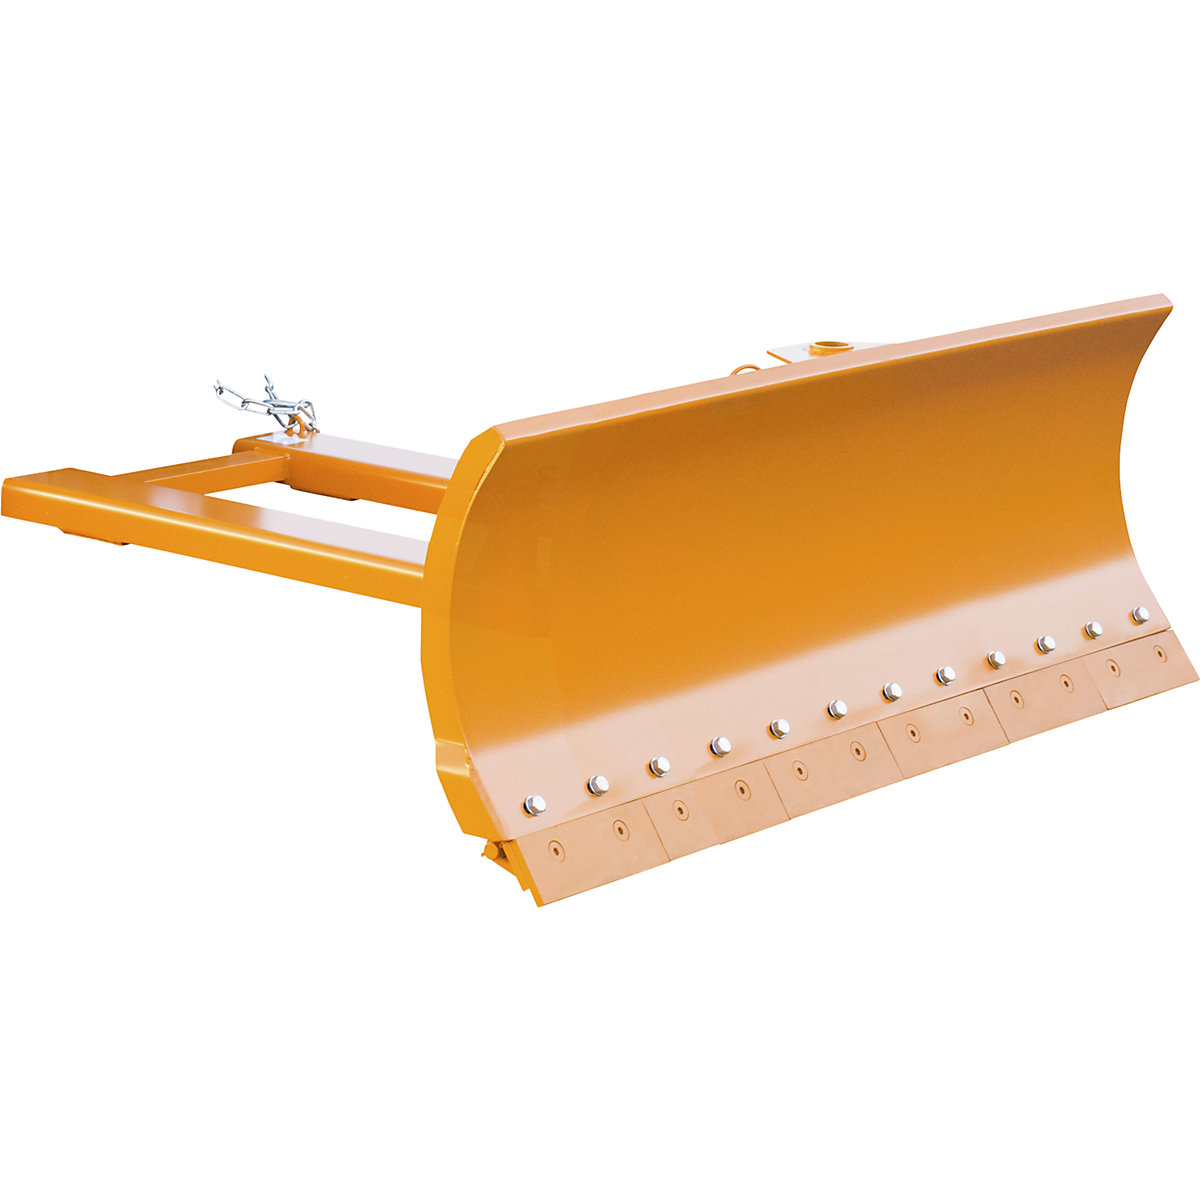 Snow plough for forklifts – eurokraft pro, with spring-loaded blade trims, blade width 1800 mm